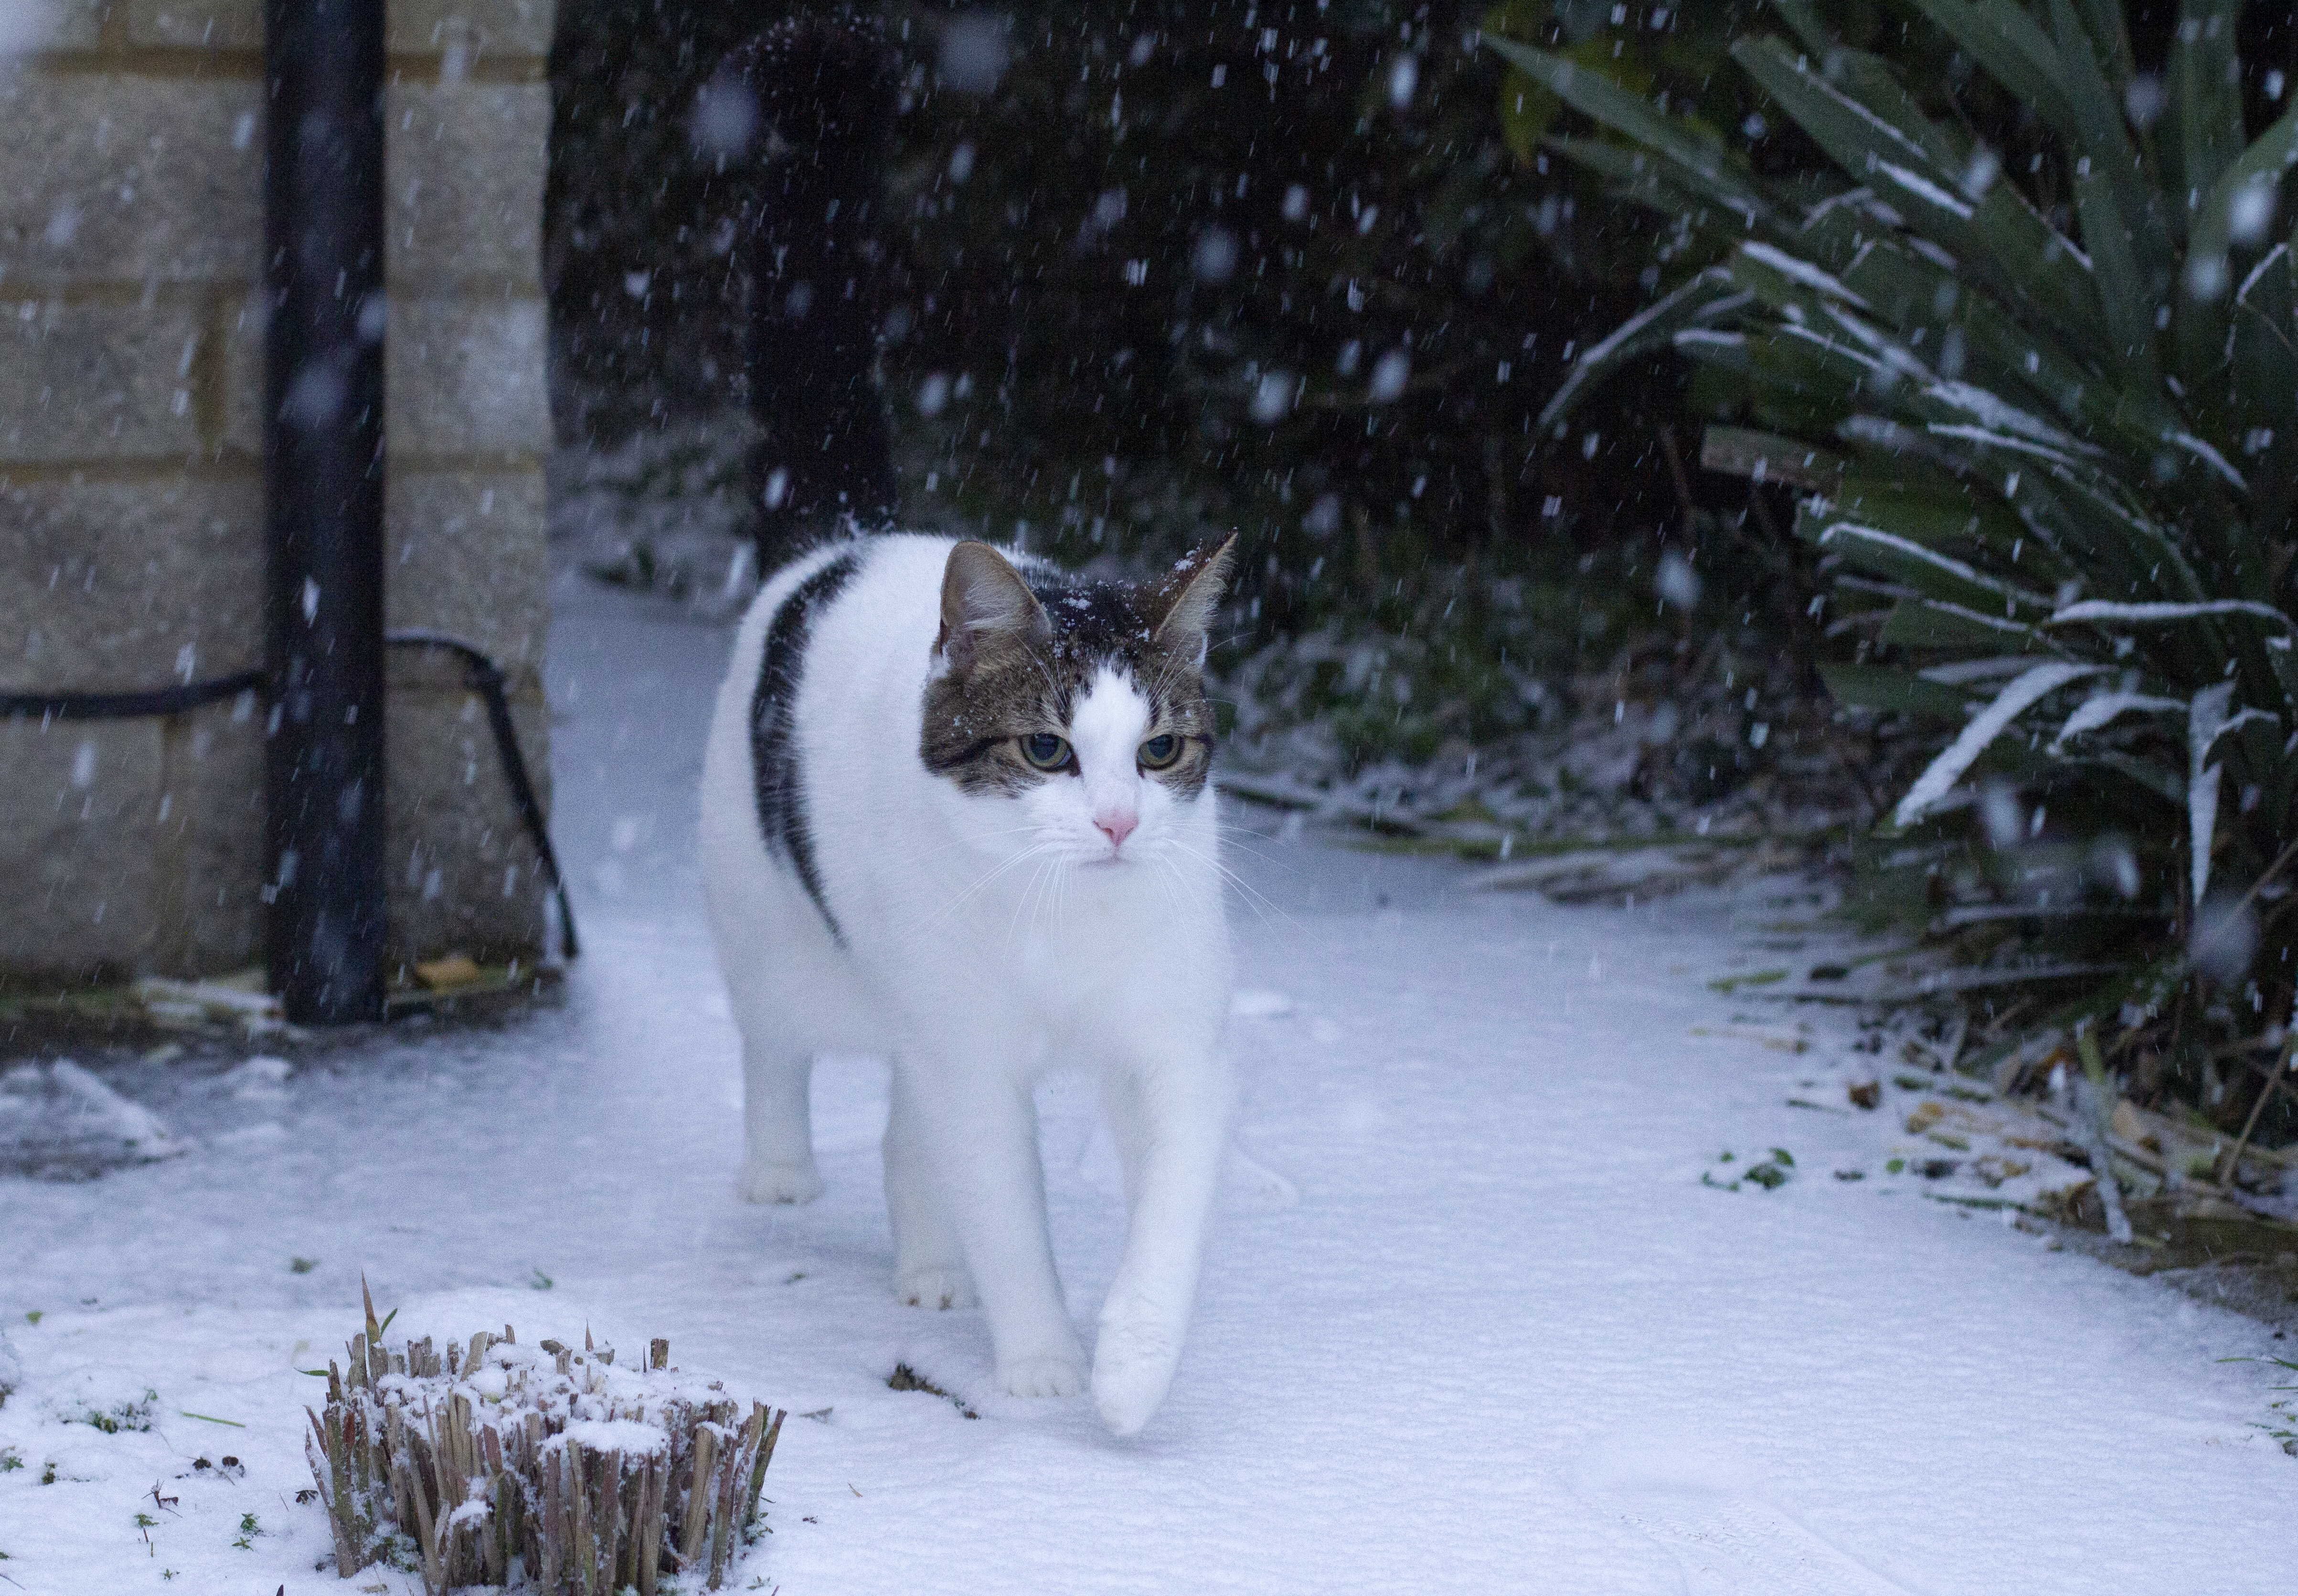 White cat with brown patches walking in snow